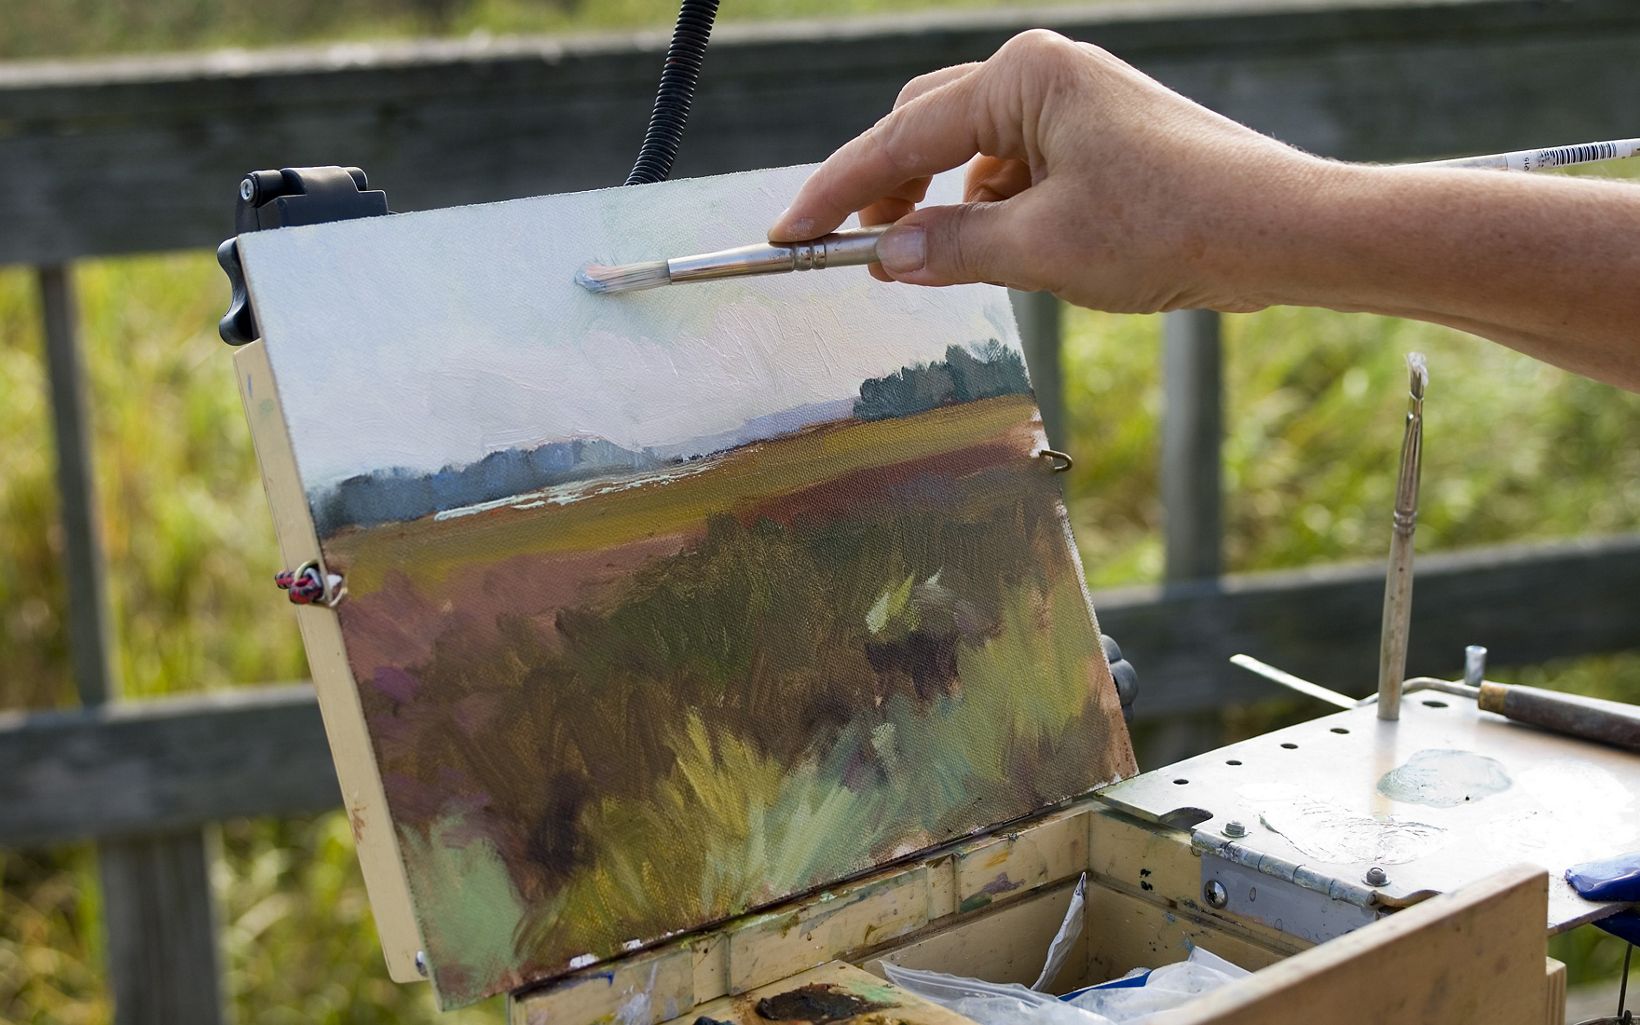 Close view of an artists' hand painting in the sky on a small canvas. The painted scene shows an open, green wetland area.